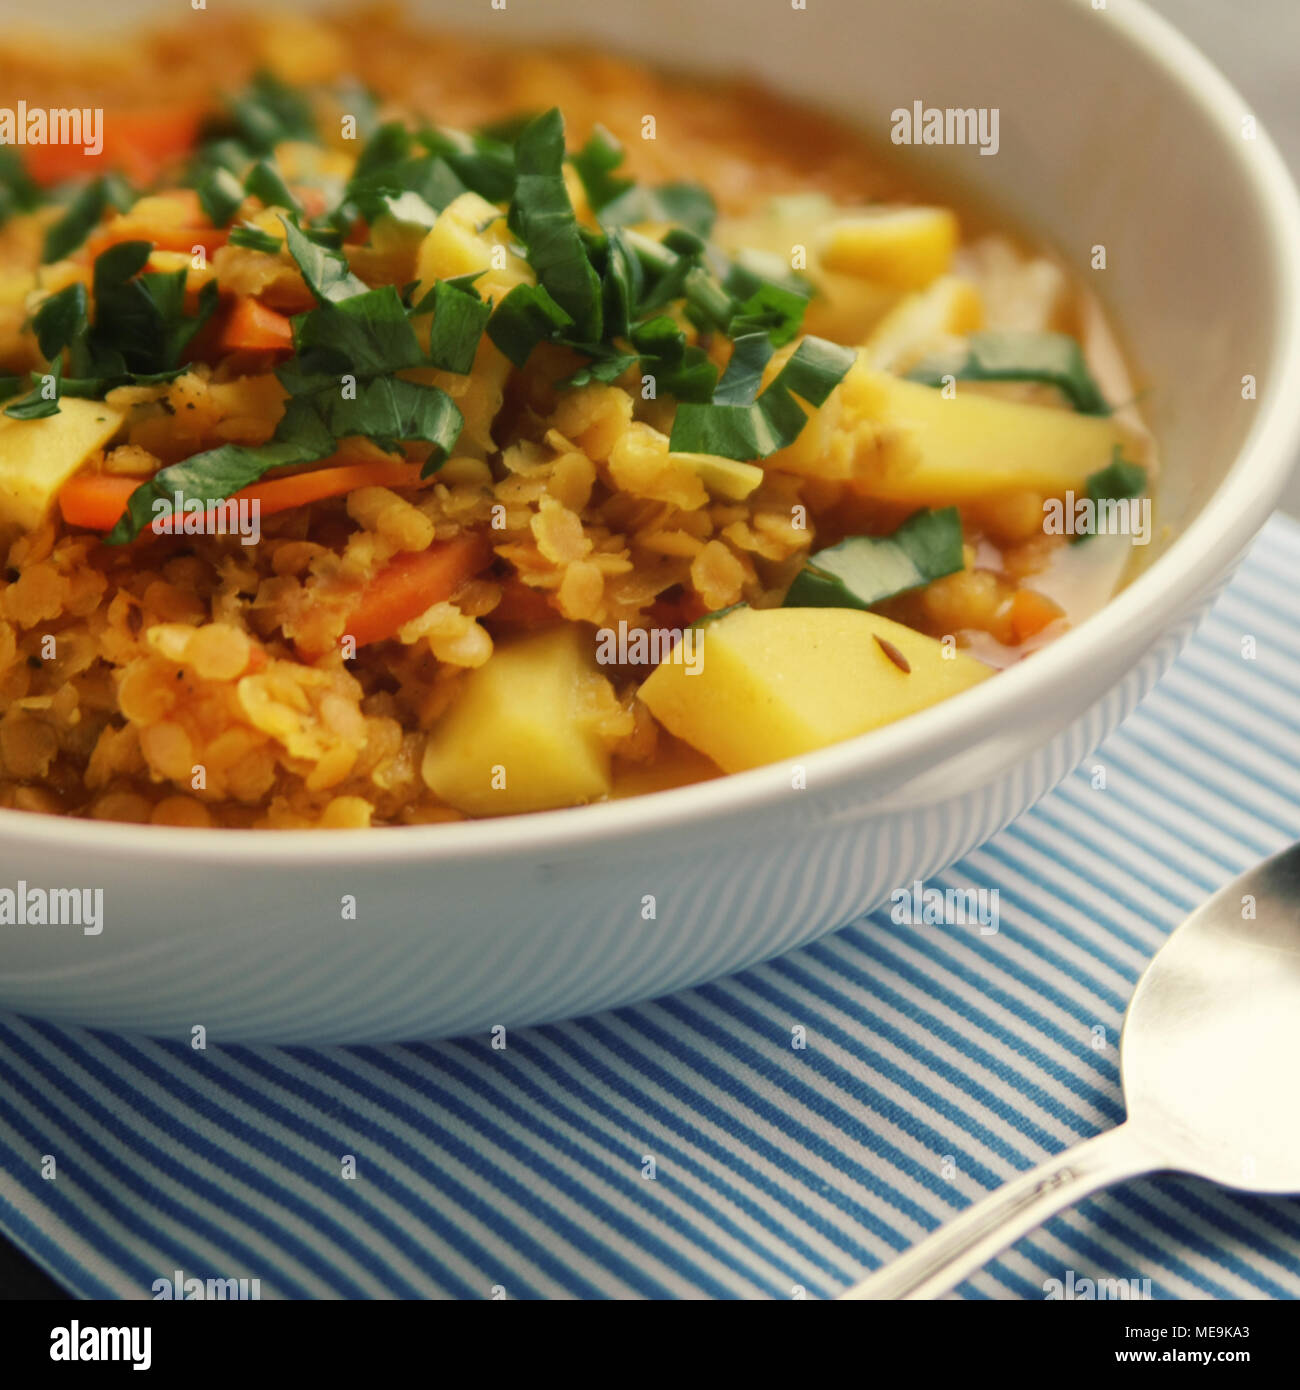 Red lentil stew on the round white plate. Close up. Vegan dish with potato, carrot and turmeric. European cuisine. Vegetarian lunch. Toned photo. Stock Photo